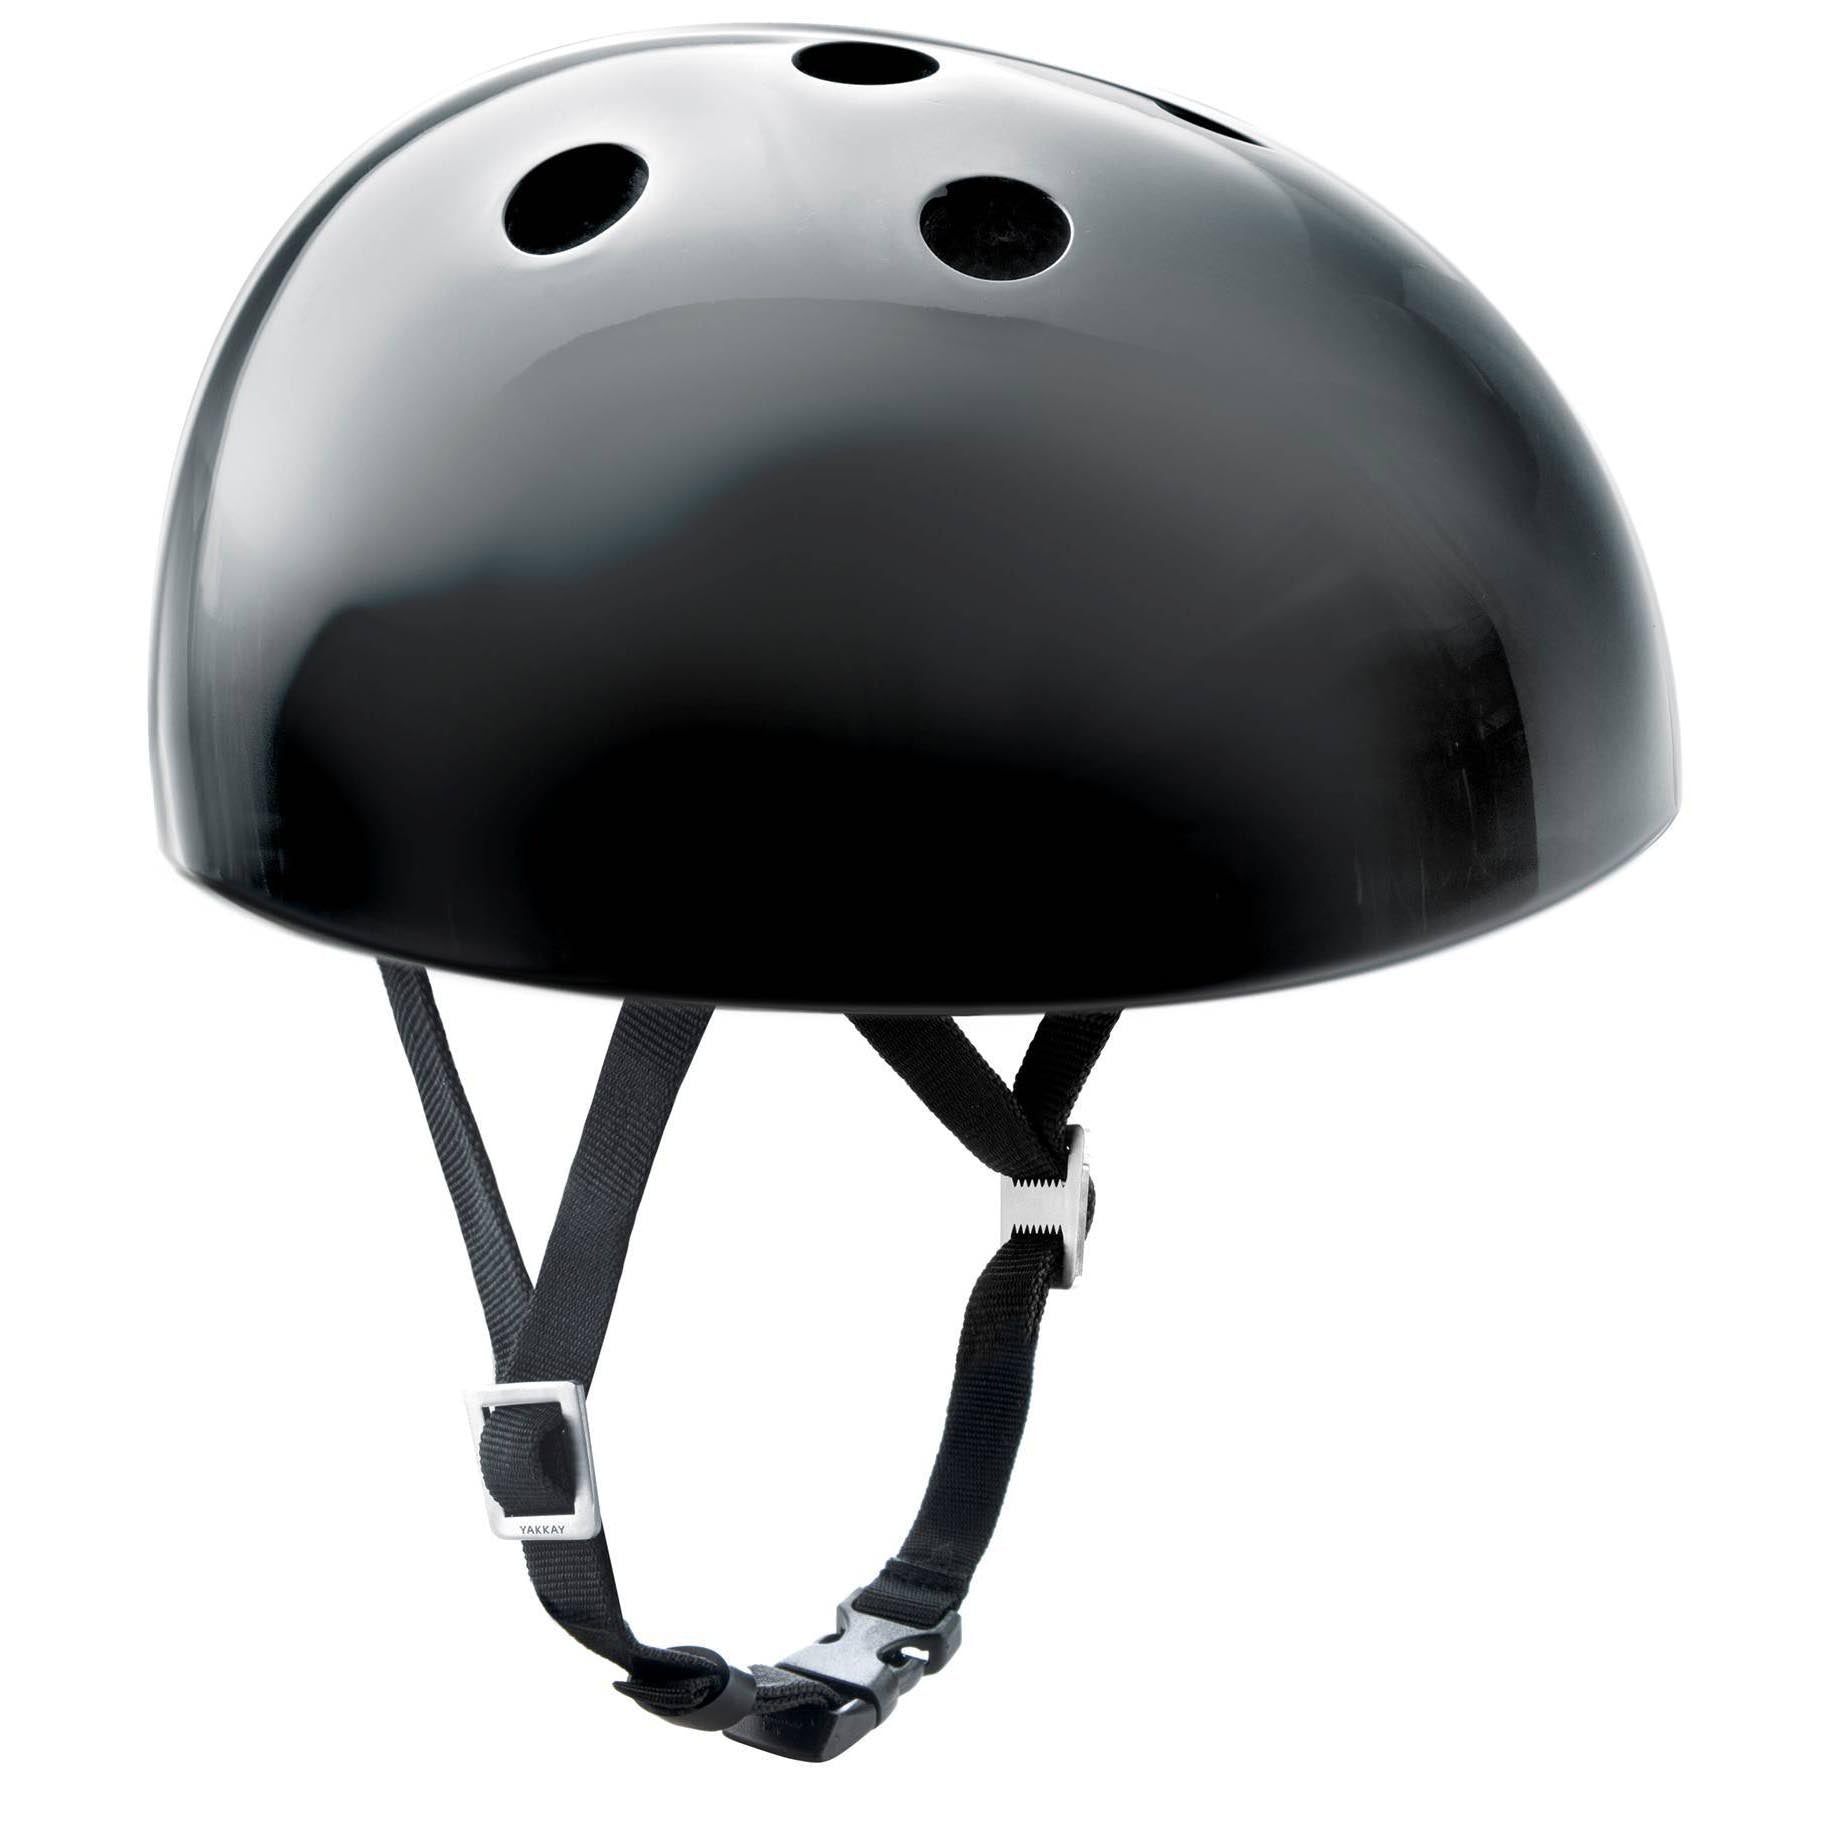 A black bicycle helmet on a white background